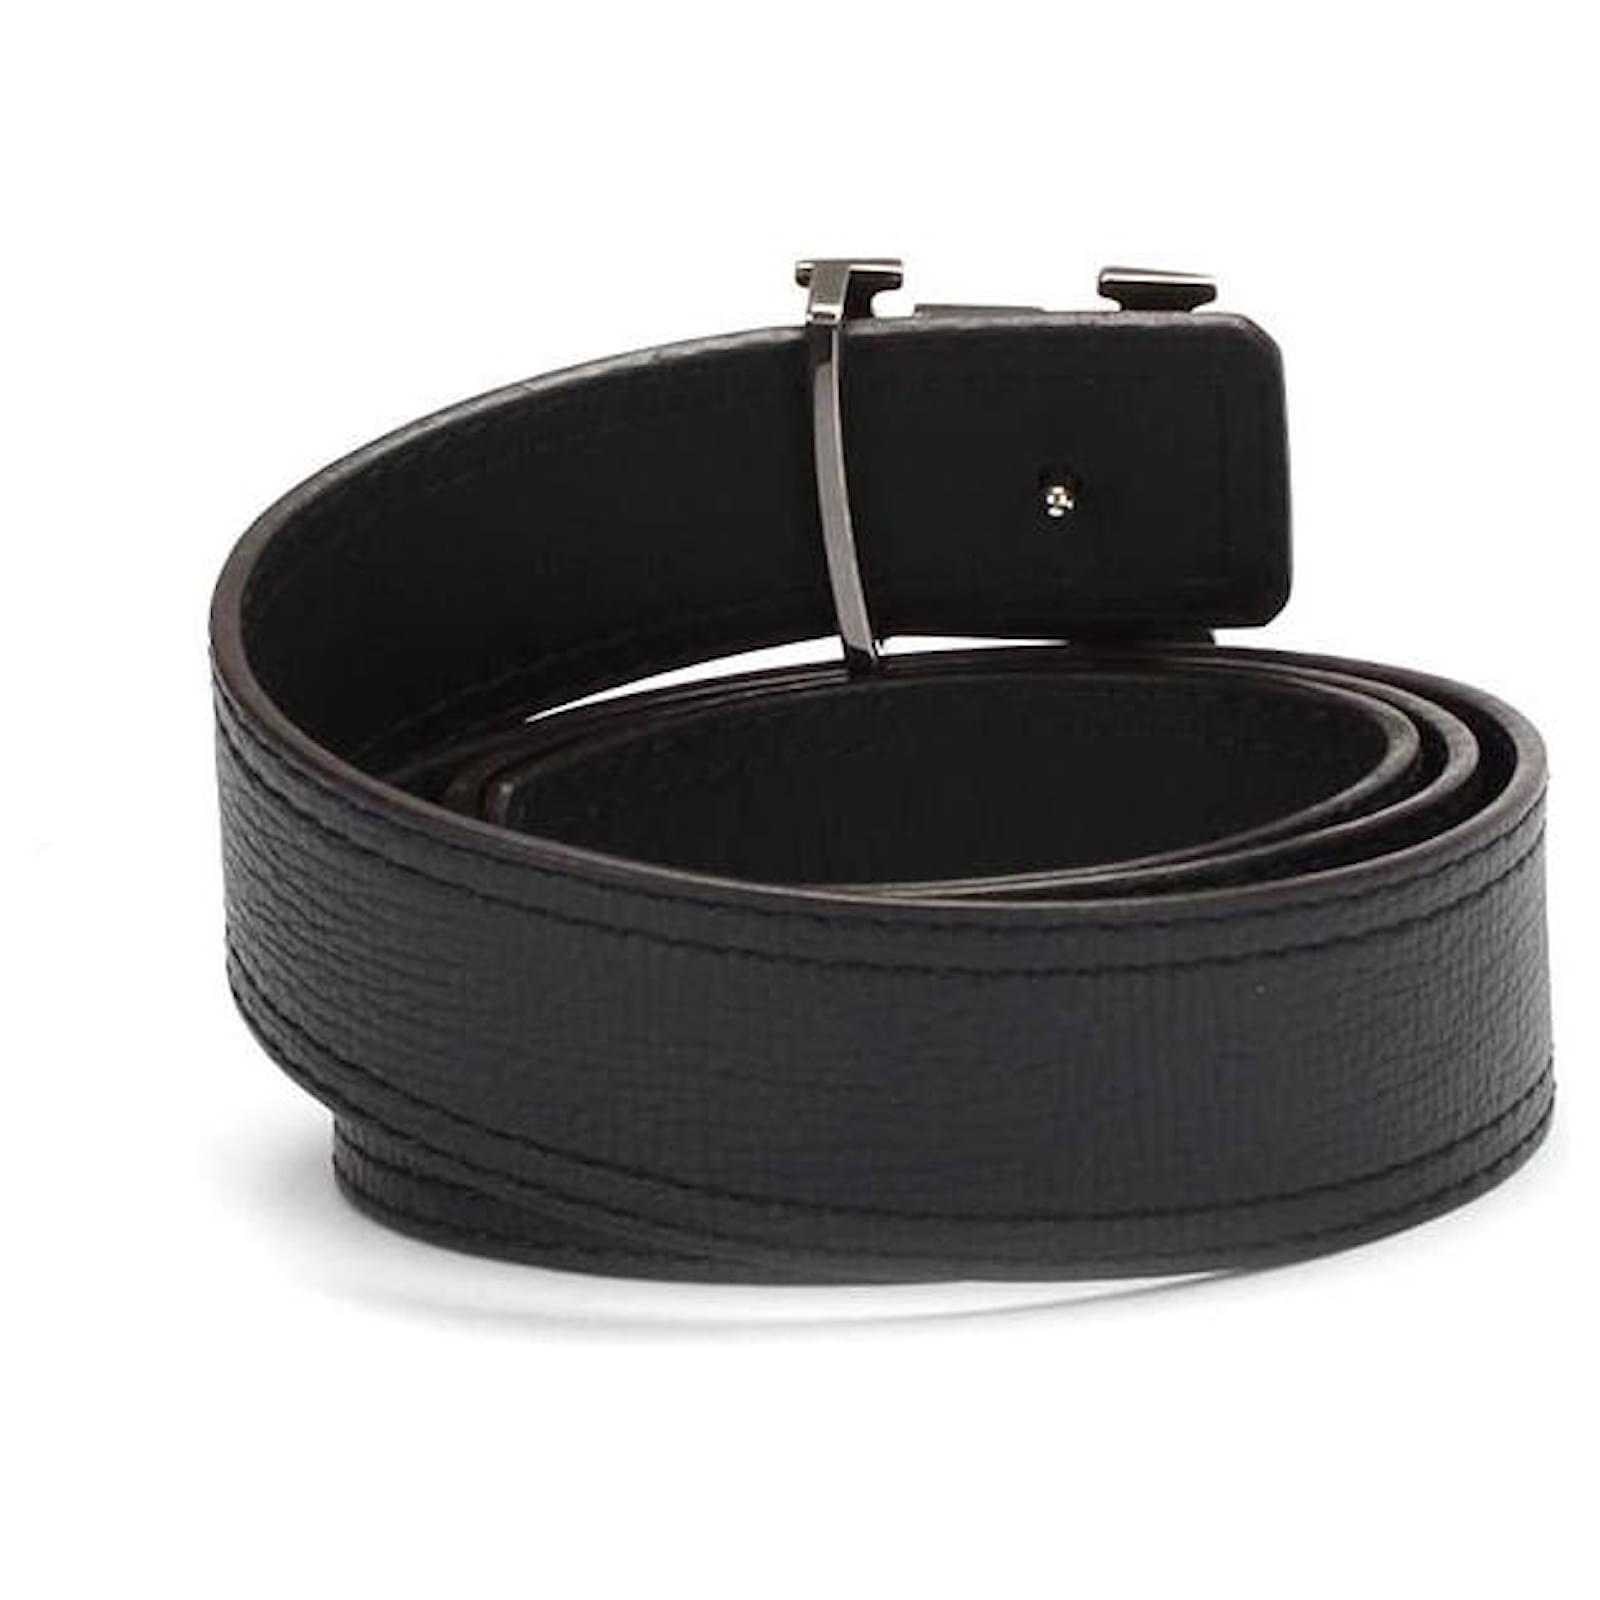 Initiales leather belt Louis Vuitton Black size XS International in Leather  - 25838801